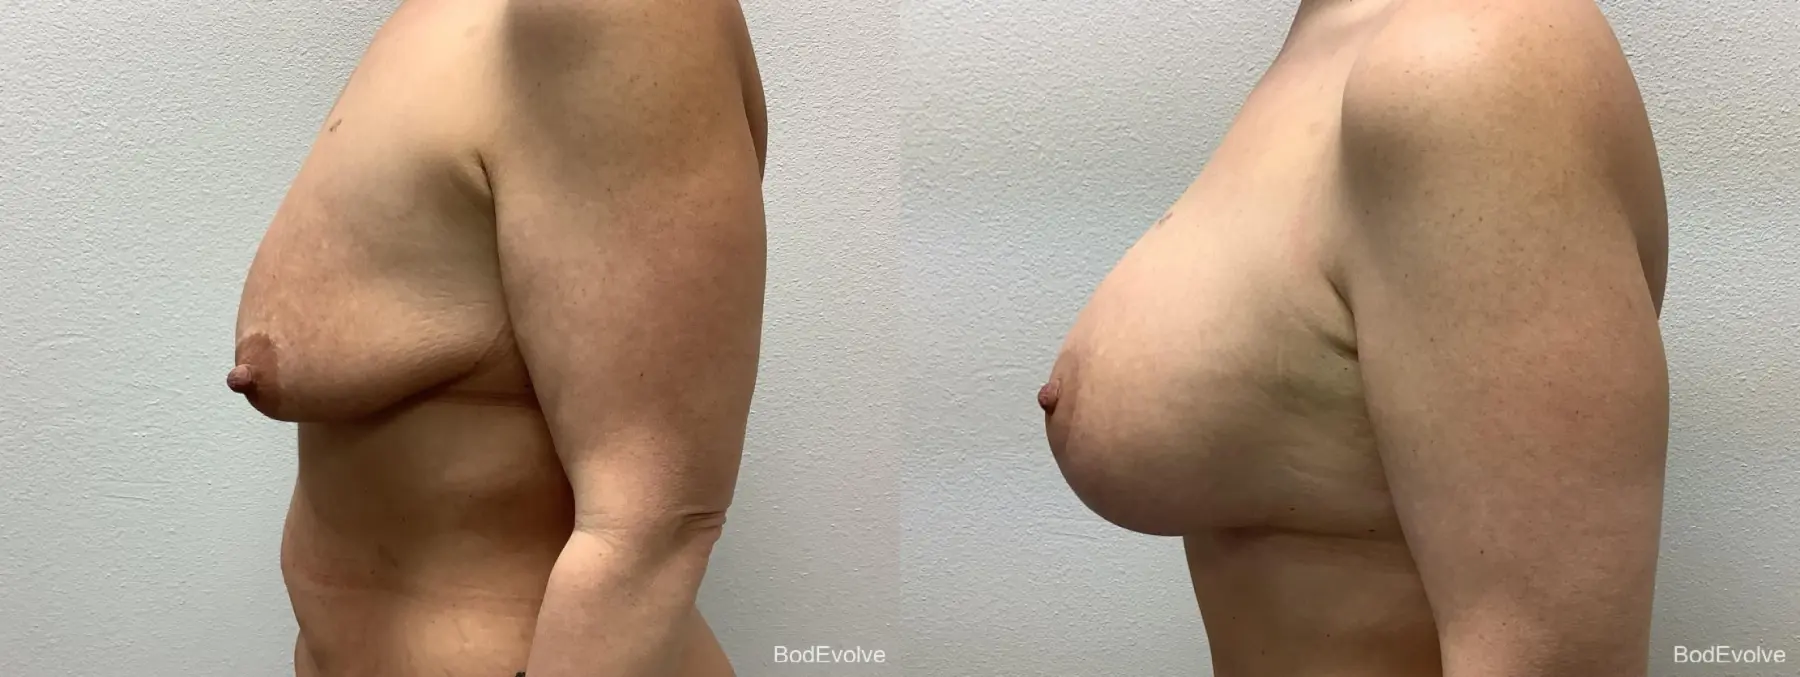 Breast Augmentation With Lift: Patient 1 - Before and After 3